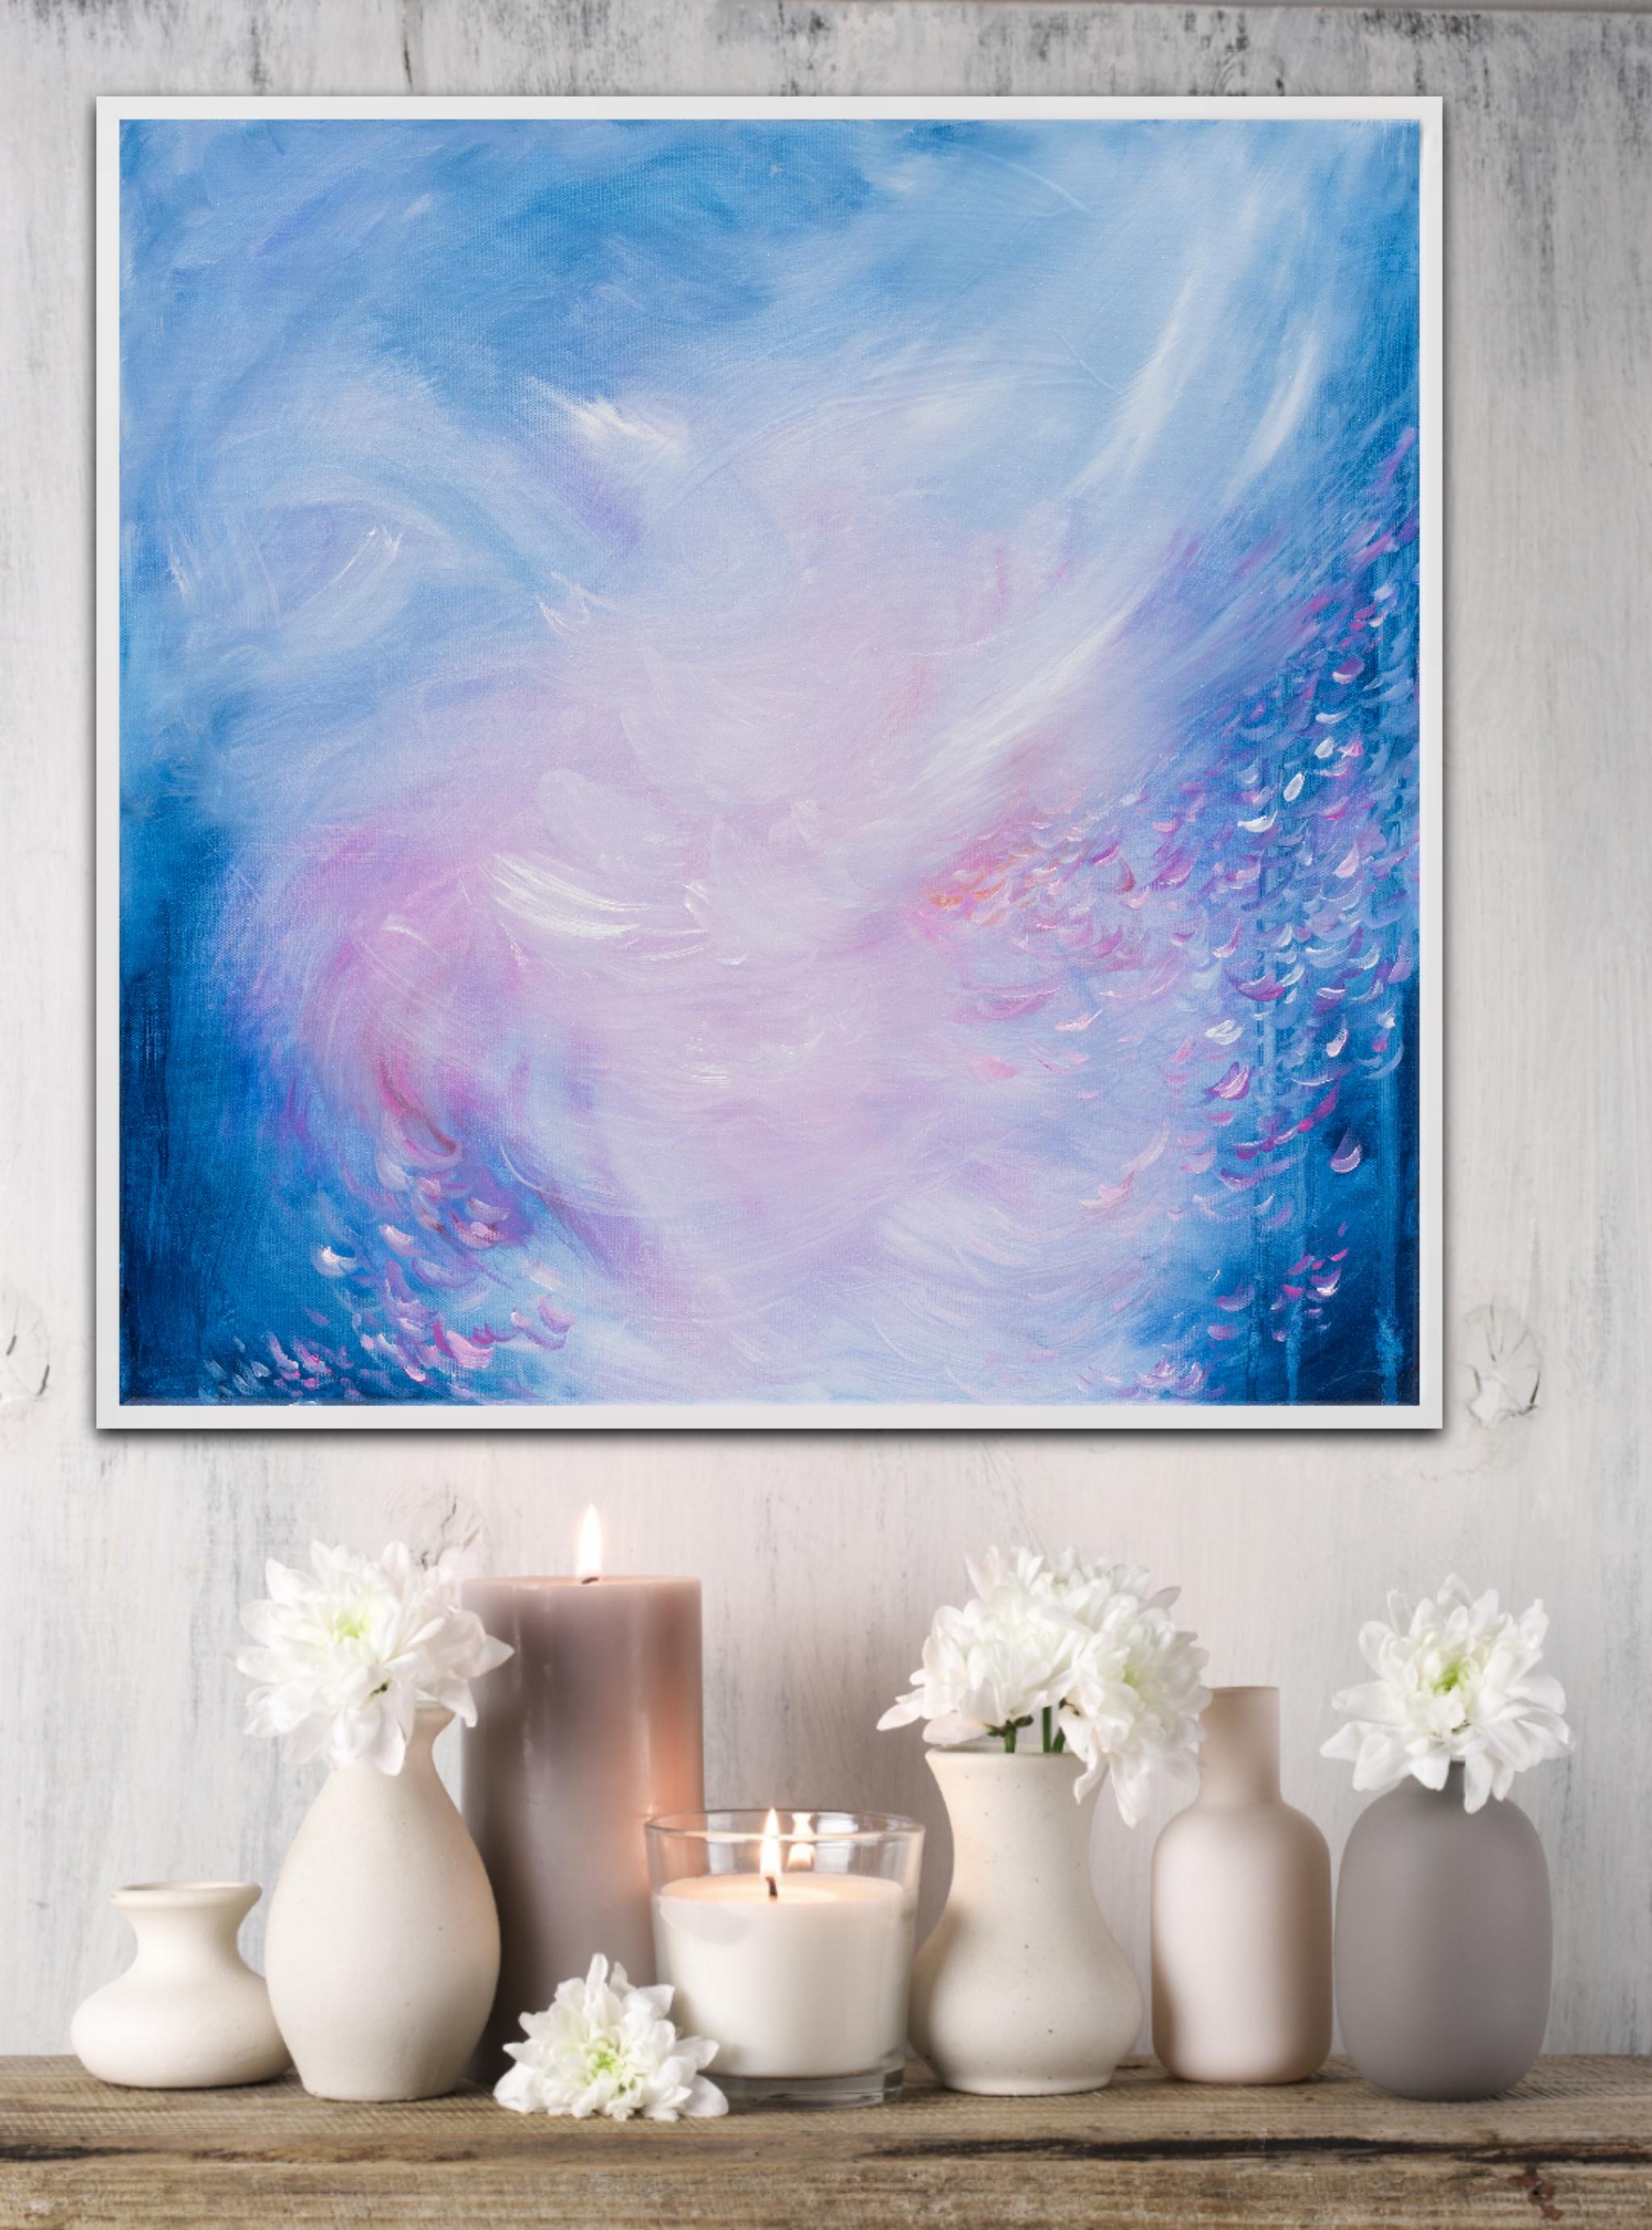 Heart open to the wind - Abstract floral nature painting 2